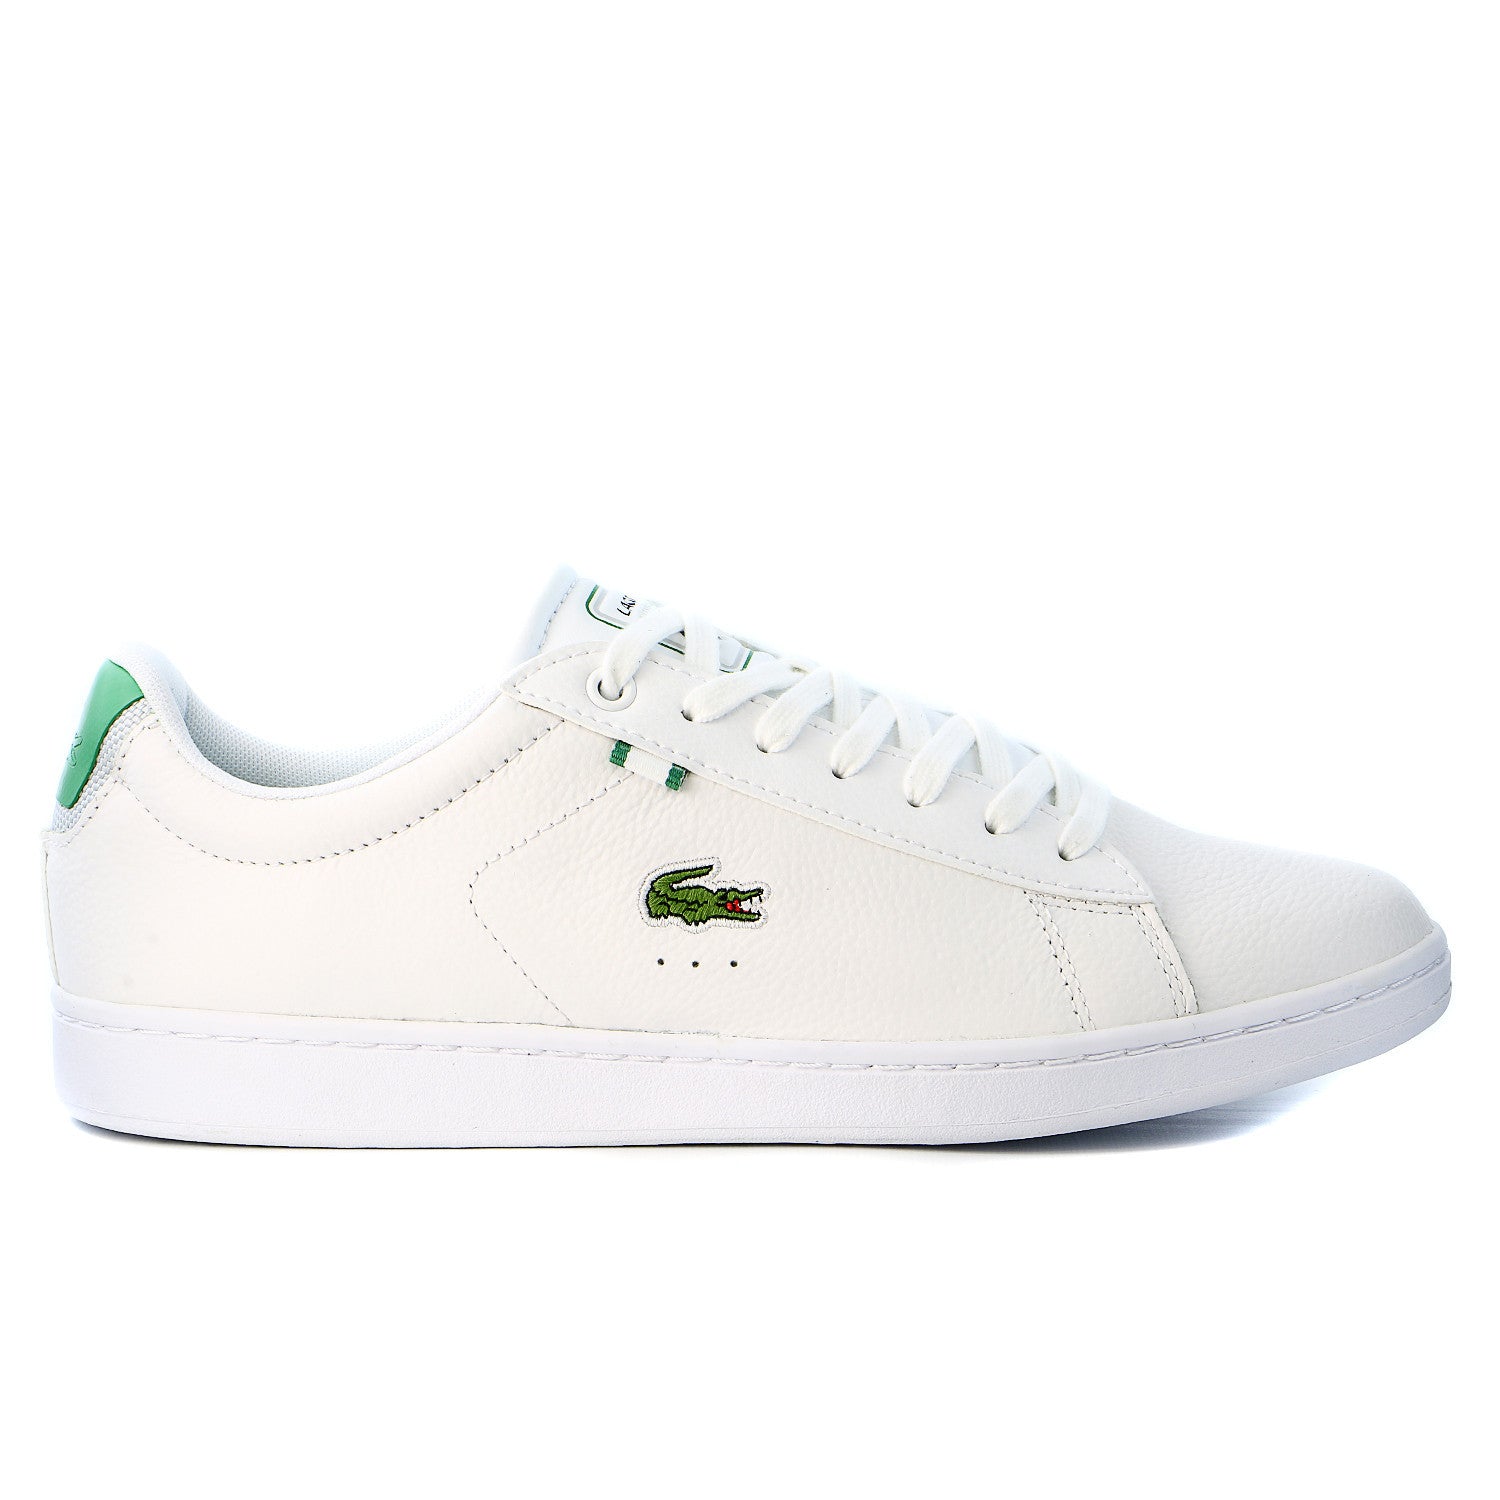 Lacoste Carnaby EVO Leather Training Sneaker Shoe White/Green Mens - Shoplifestyle